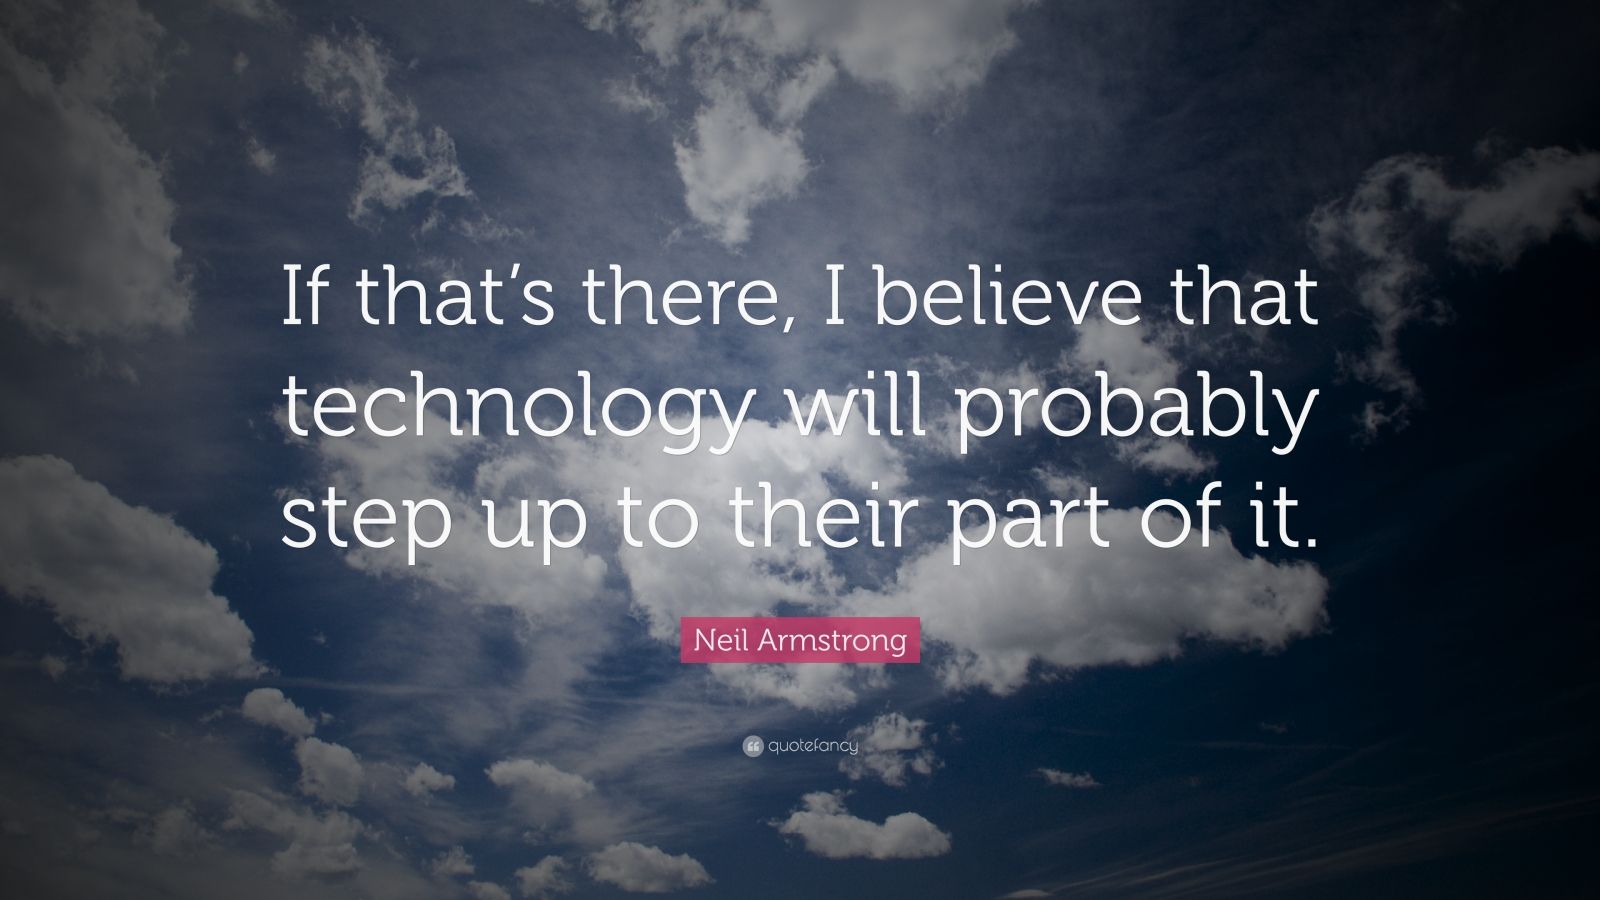 Neil Armstrong Quote: “If that’s there, I believe that technology will ...